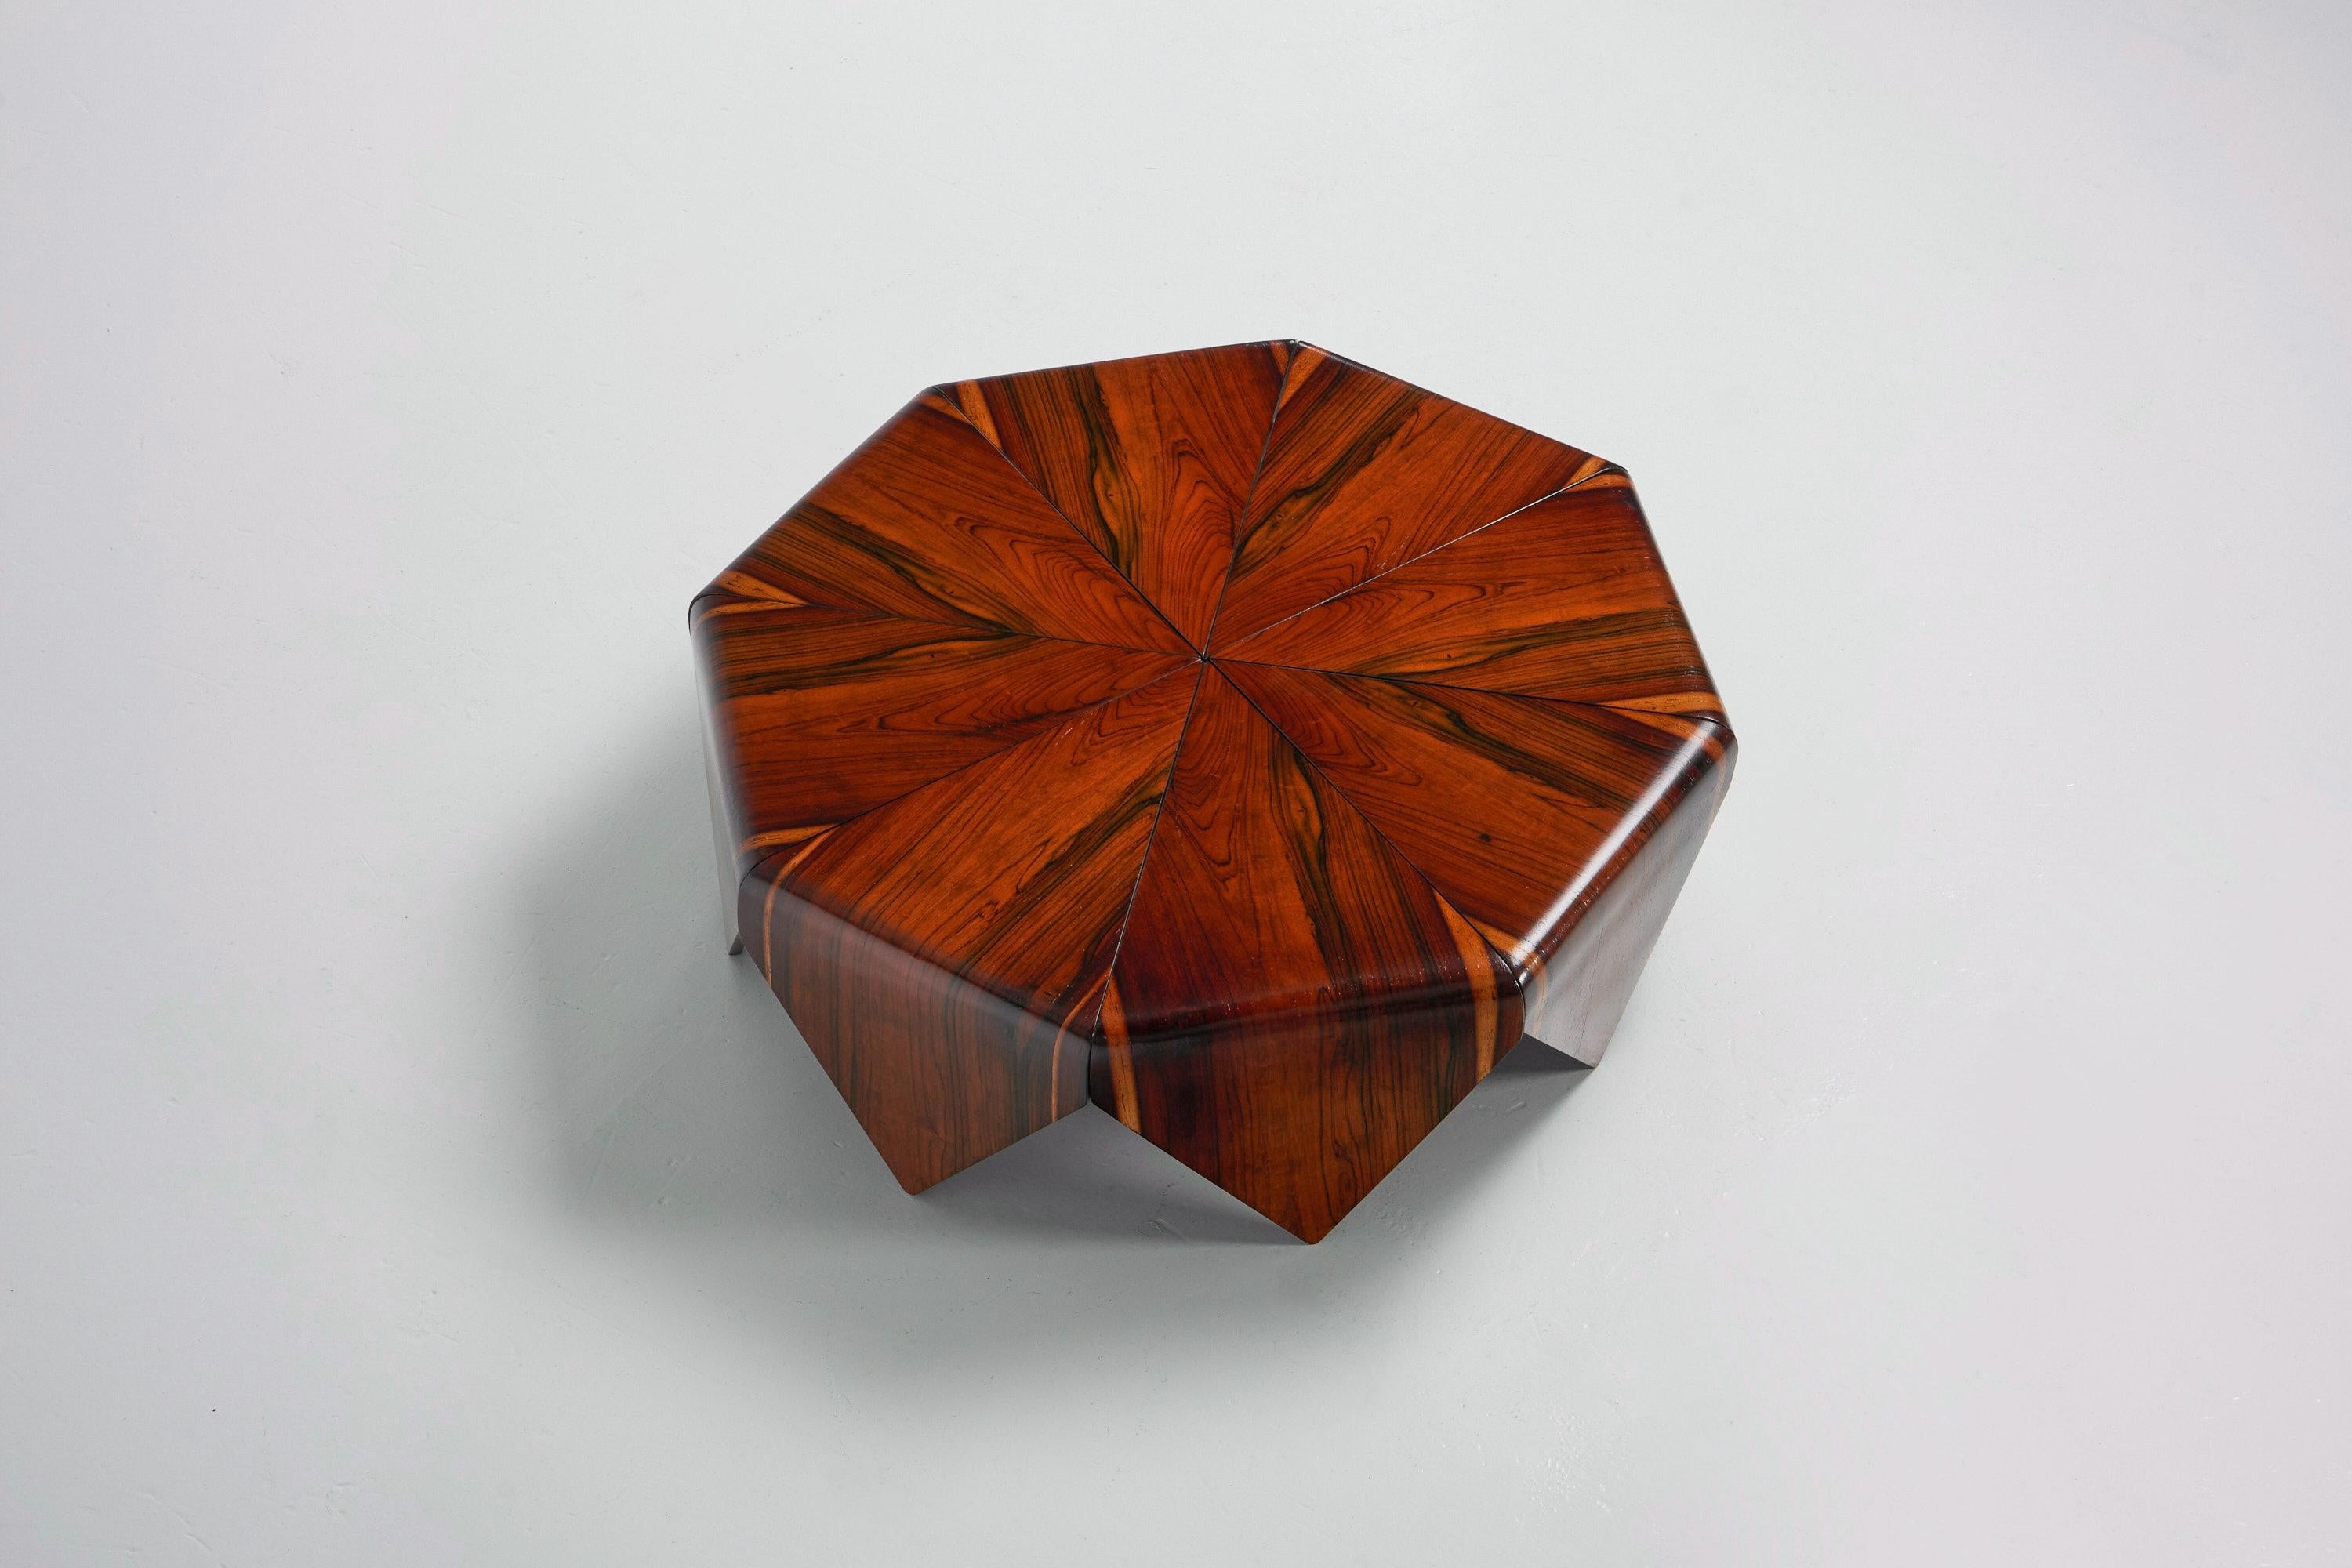 Stunning and rare early original so-called 'Petalas' coffee table designed by Jorge Zalszupin and manufactured in his own company L’Atelier, Brazil 1959. The Pétalas series was created in order to make the best possible use of the wood used during